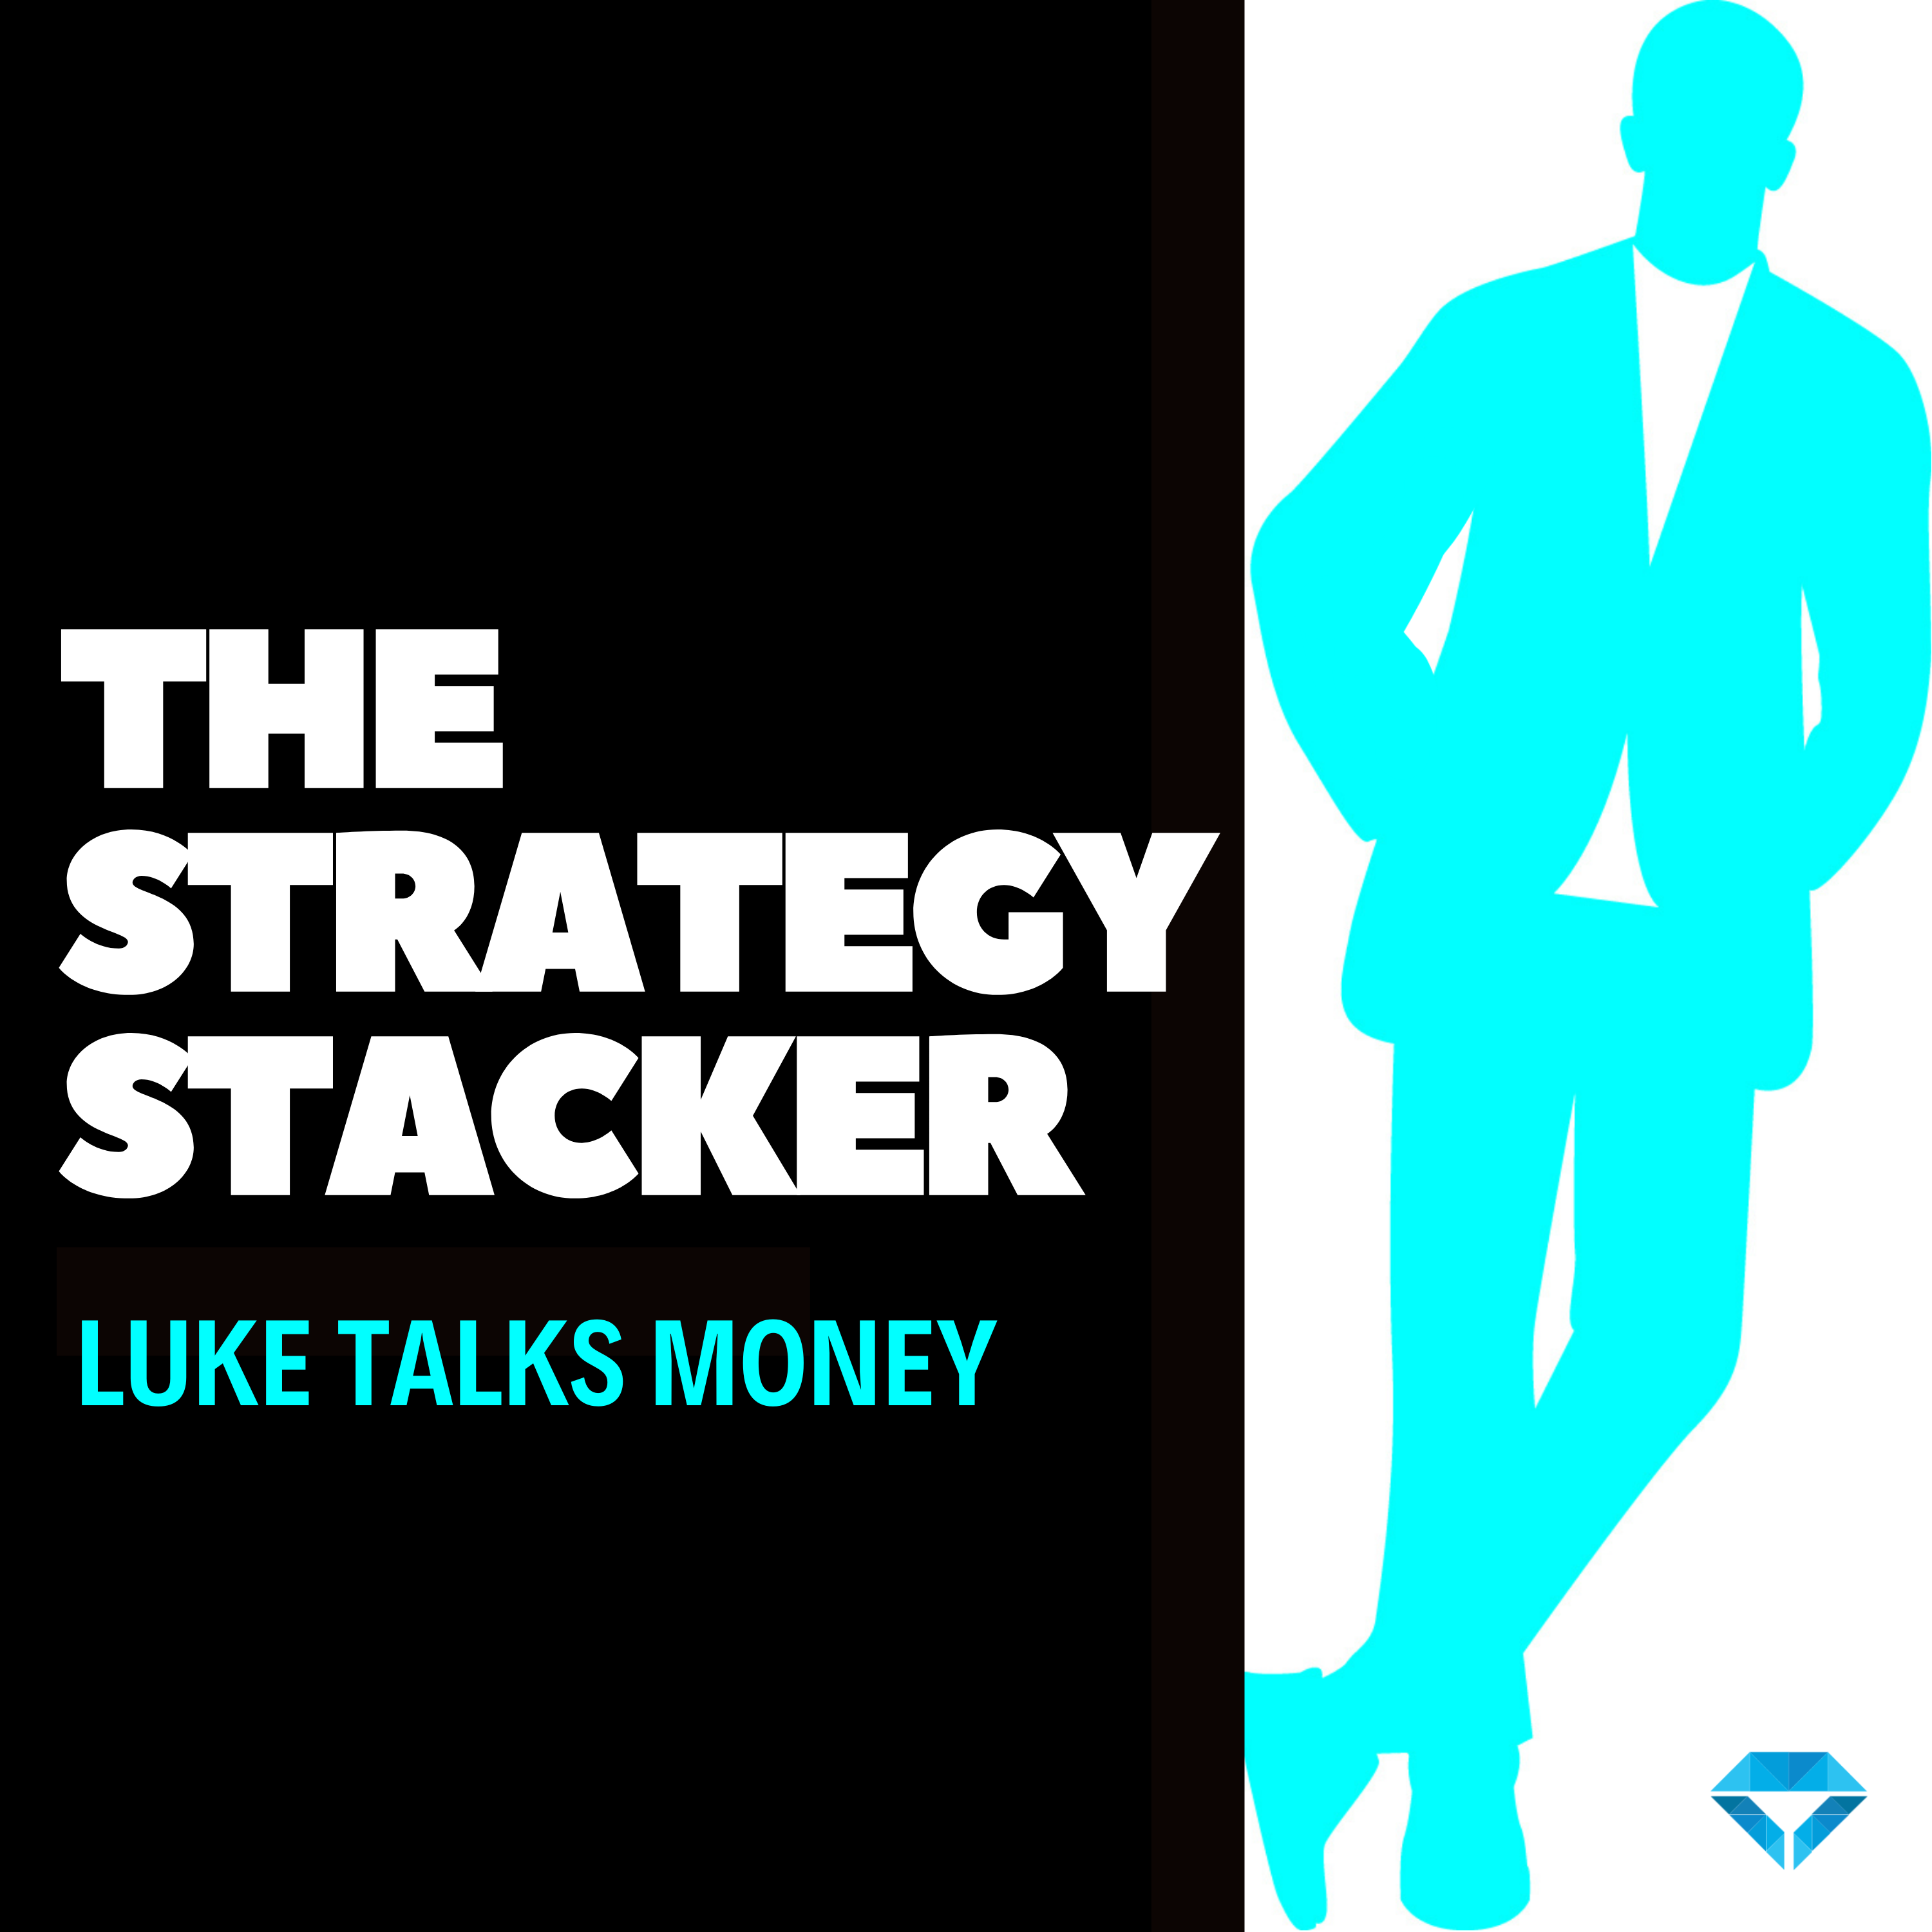 The Strategy Stacker